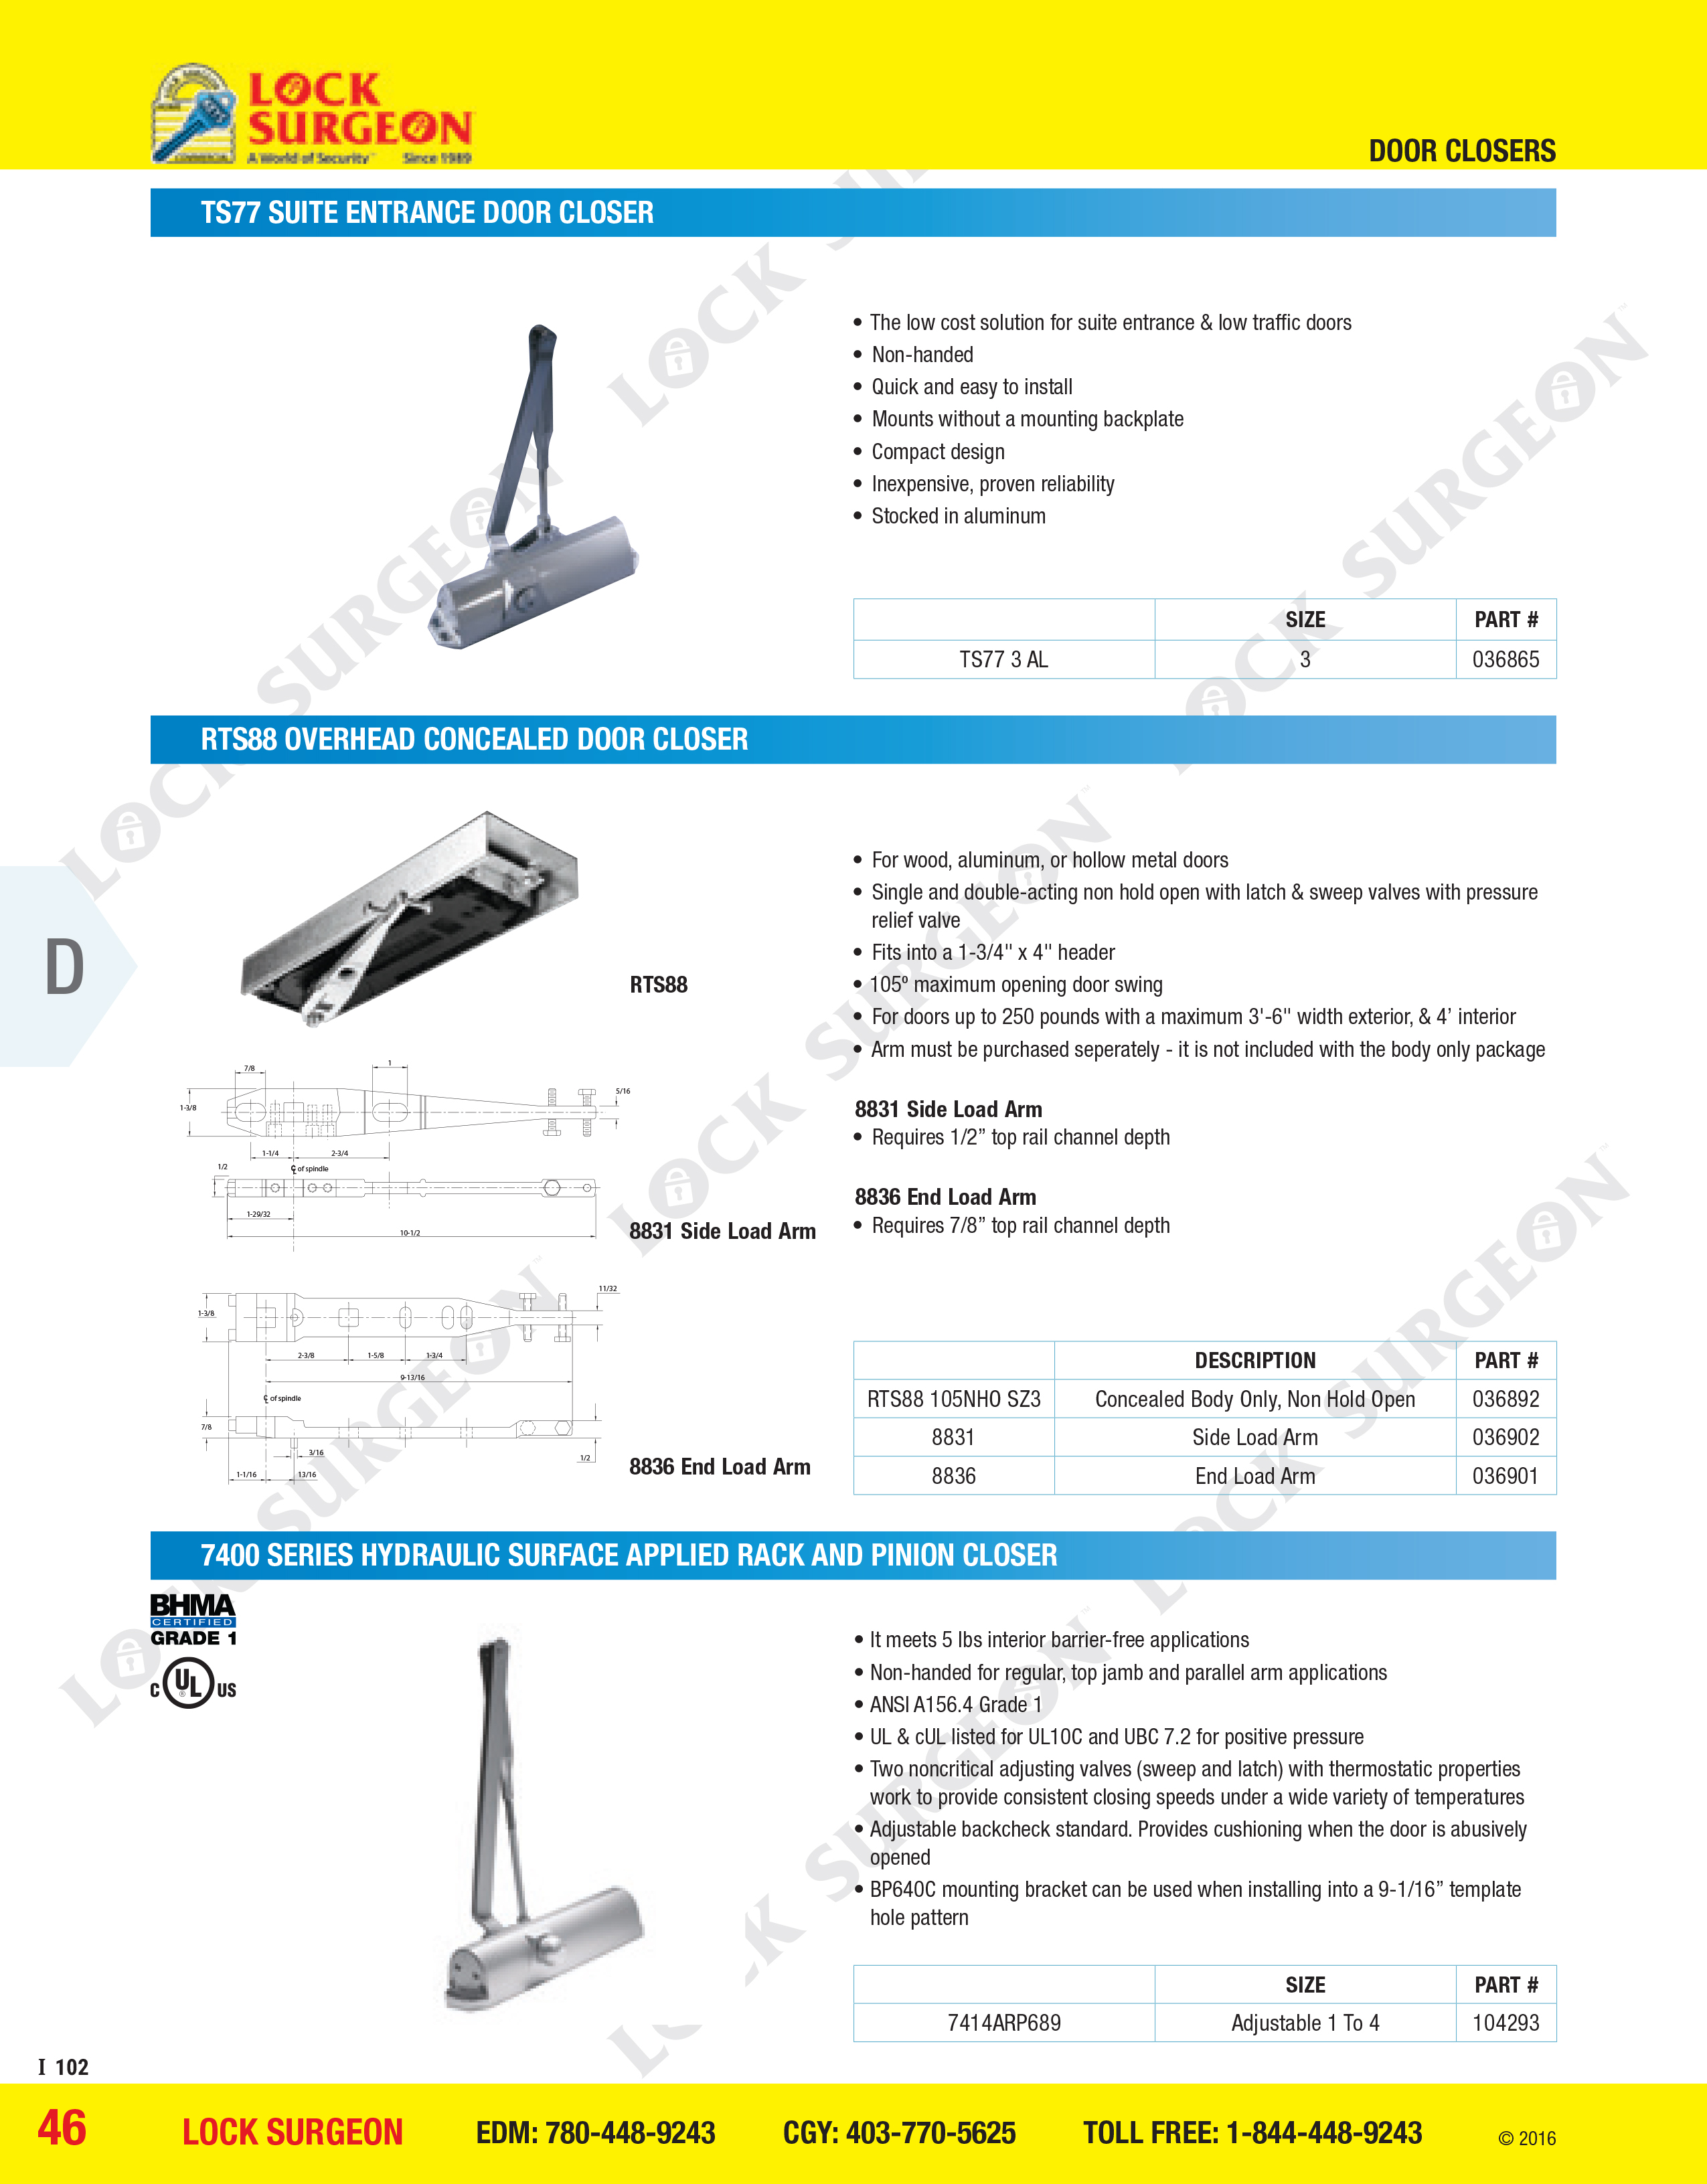 TS77 entrance door closer RTS88 concealed door closer & 7400 series hydraulic rack and pinion closer